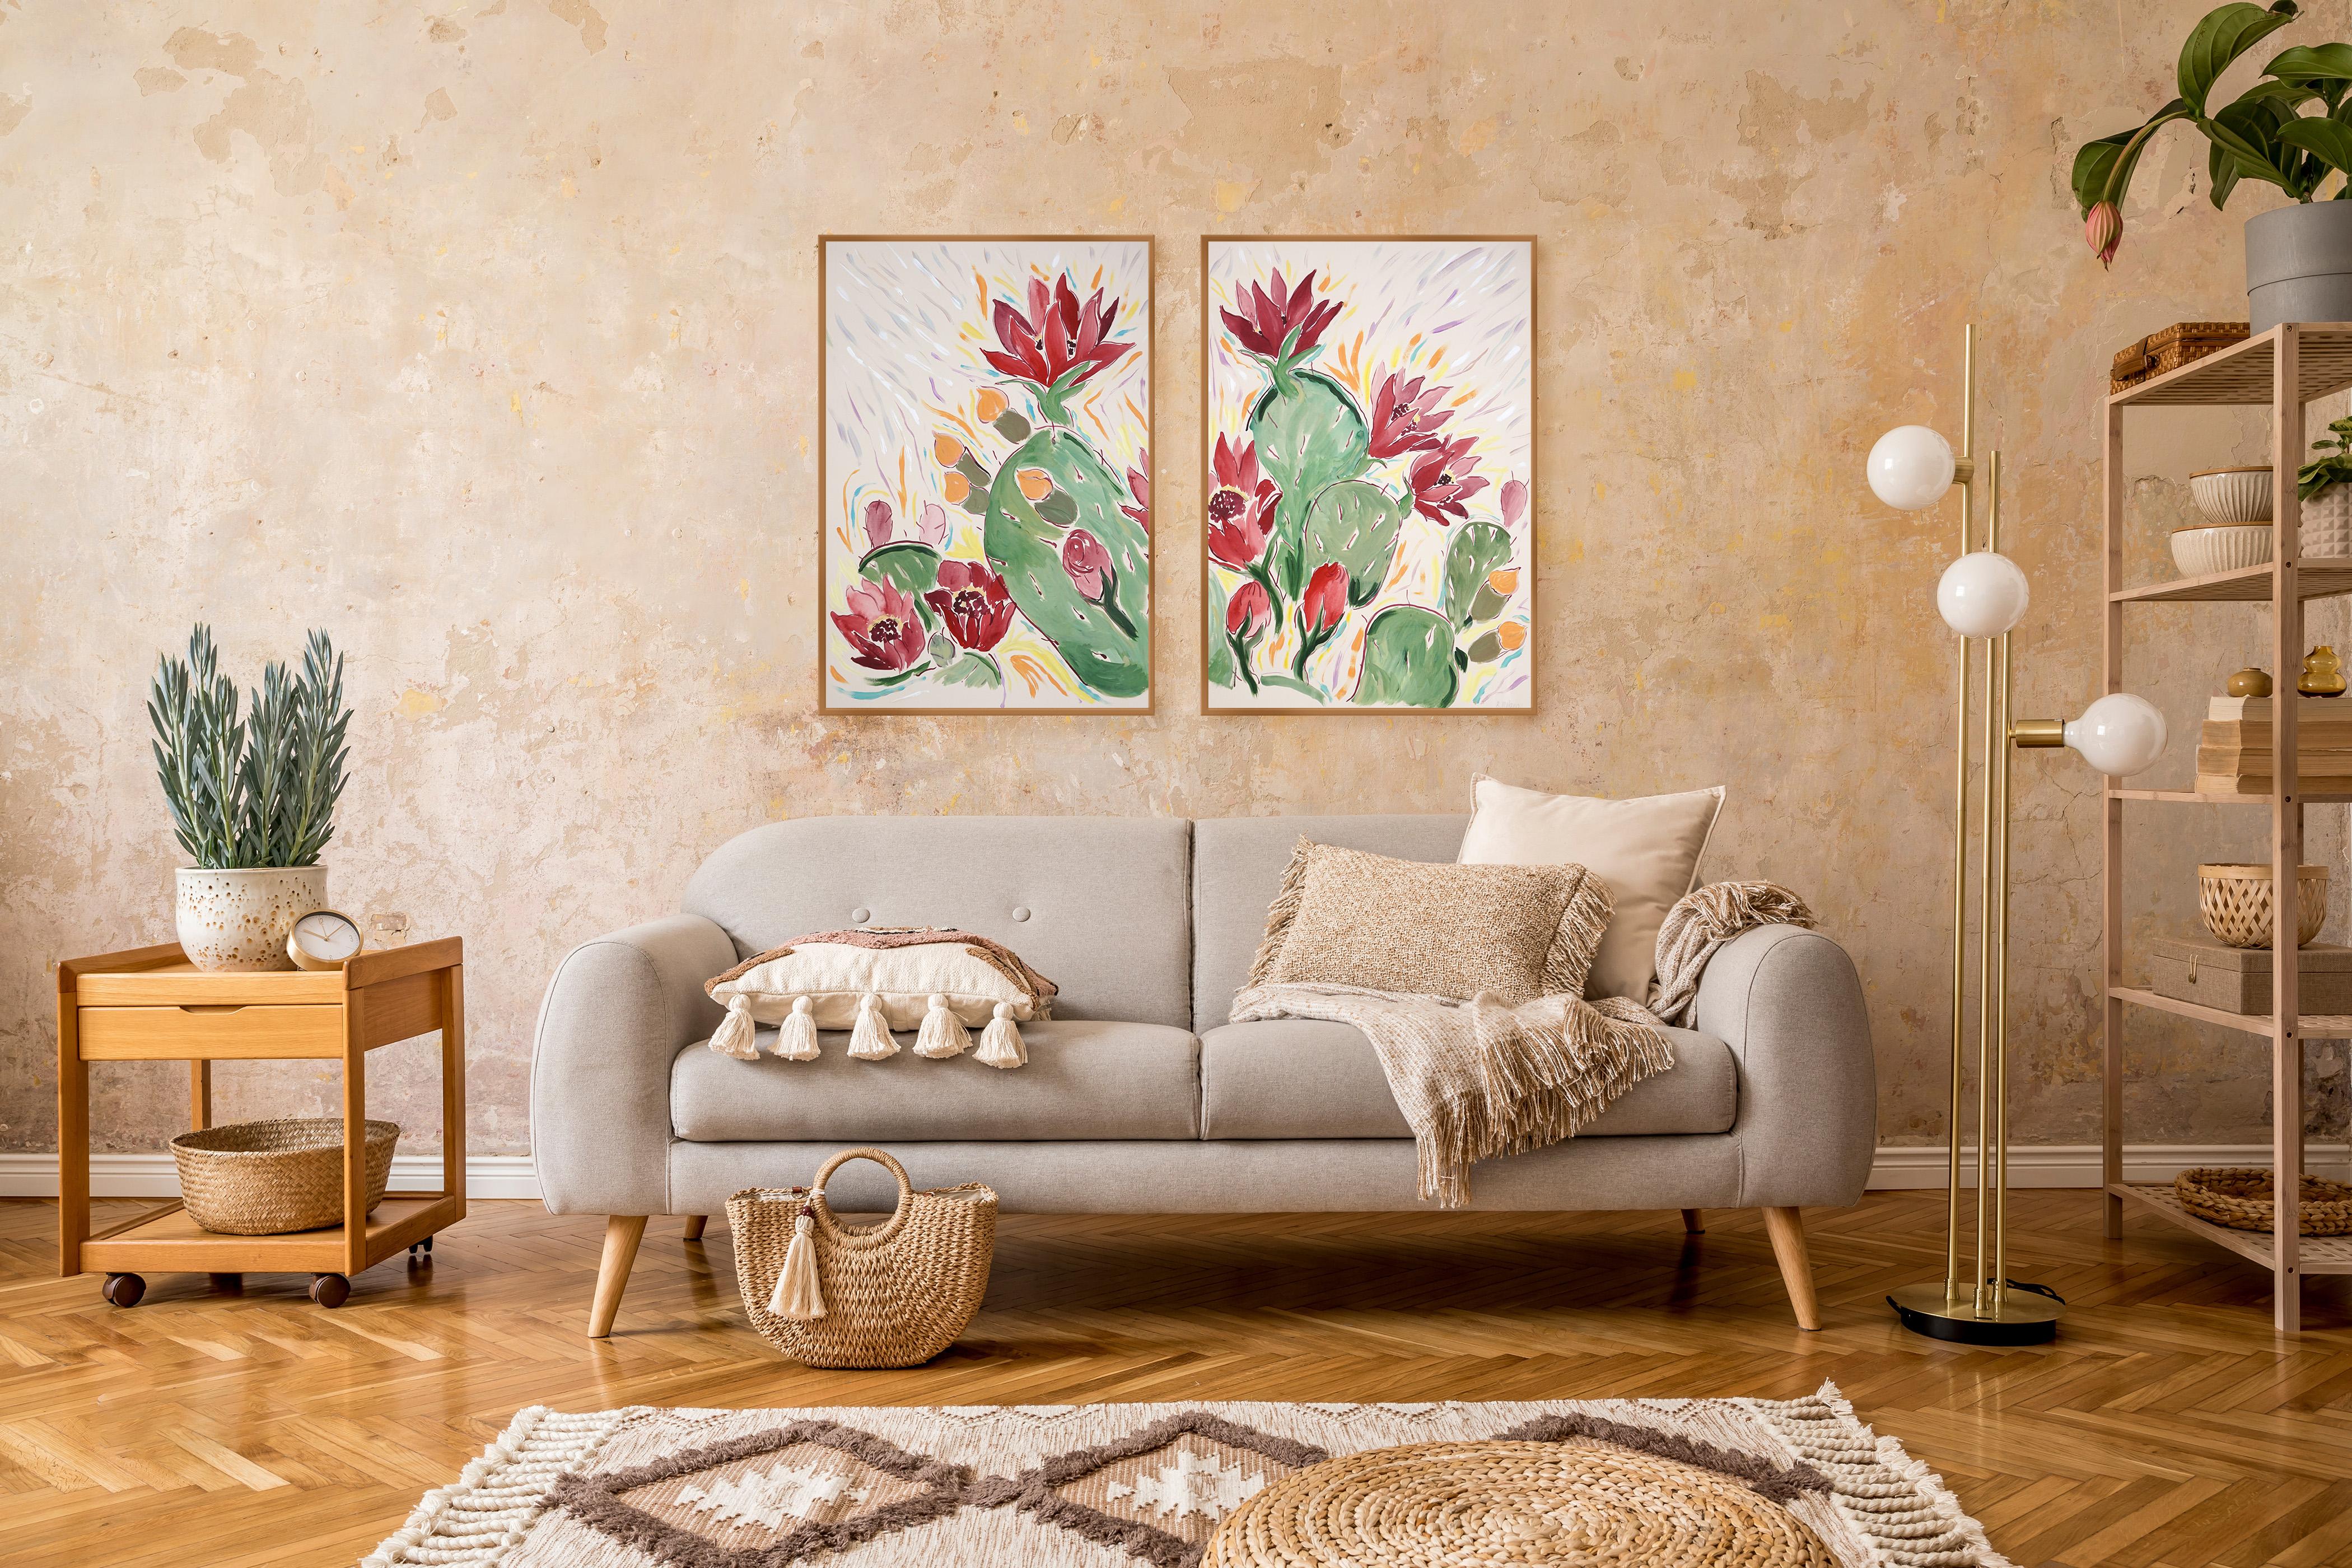 Blooming Flowers in Red, Green Wild Cactus Diptych, Illustration Style, Desert  2